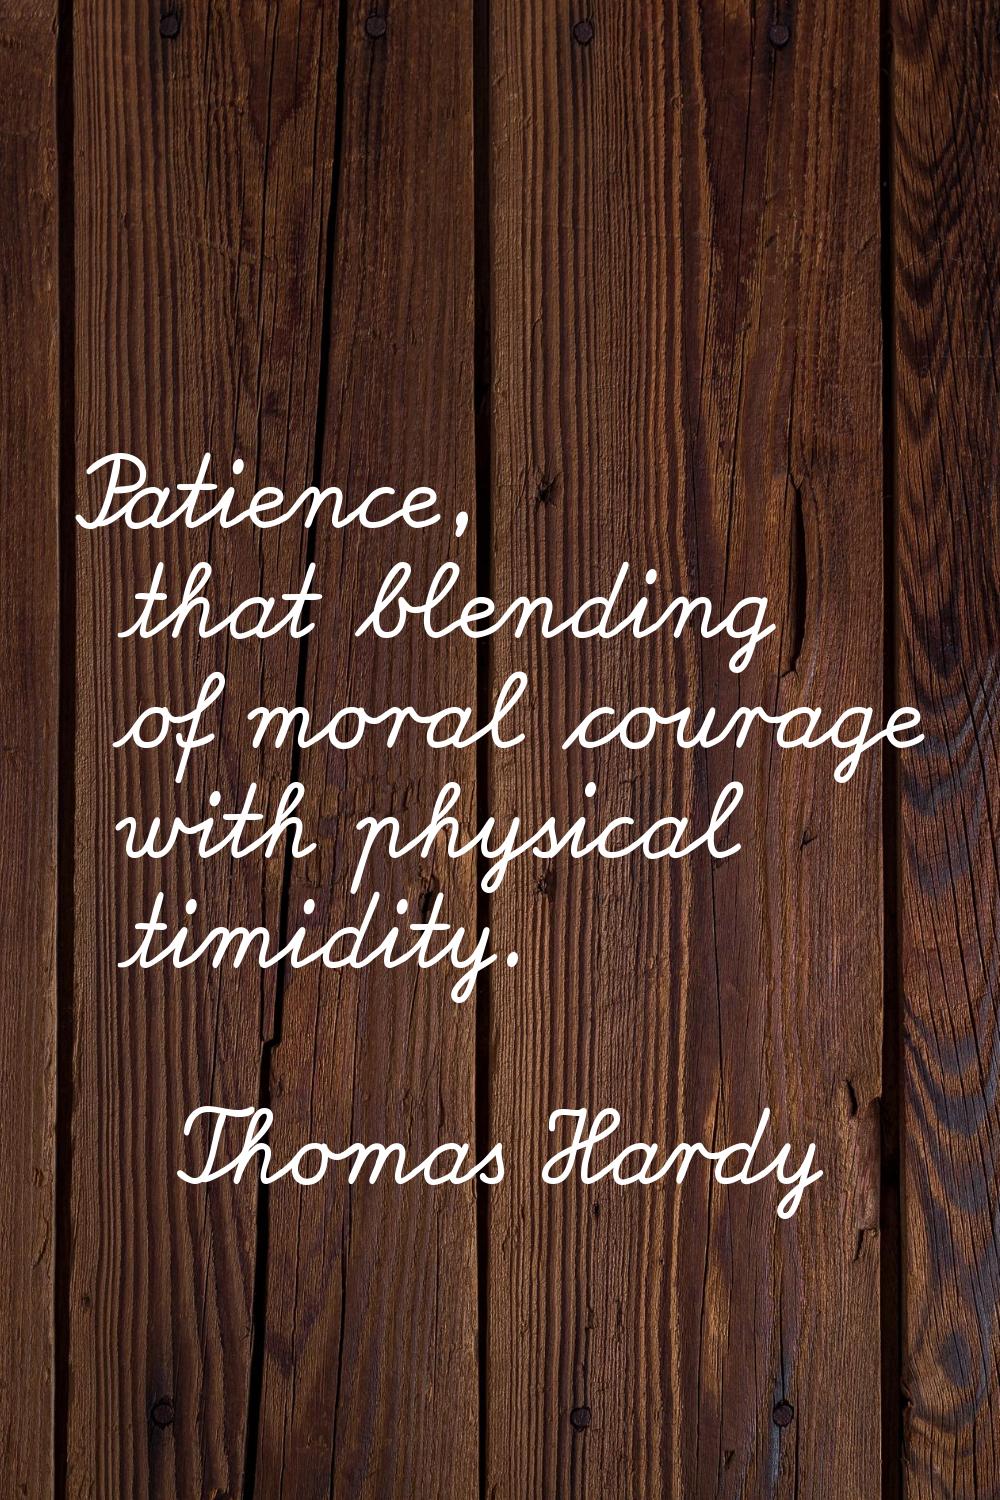 Patience, that blending of moral courage with physical timidity.